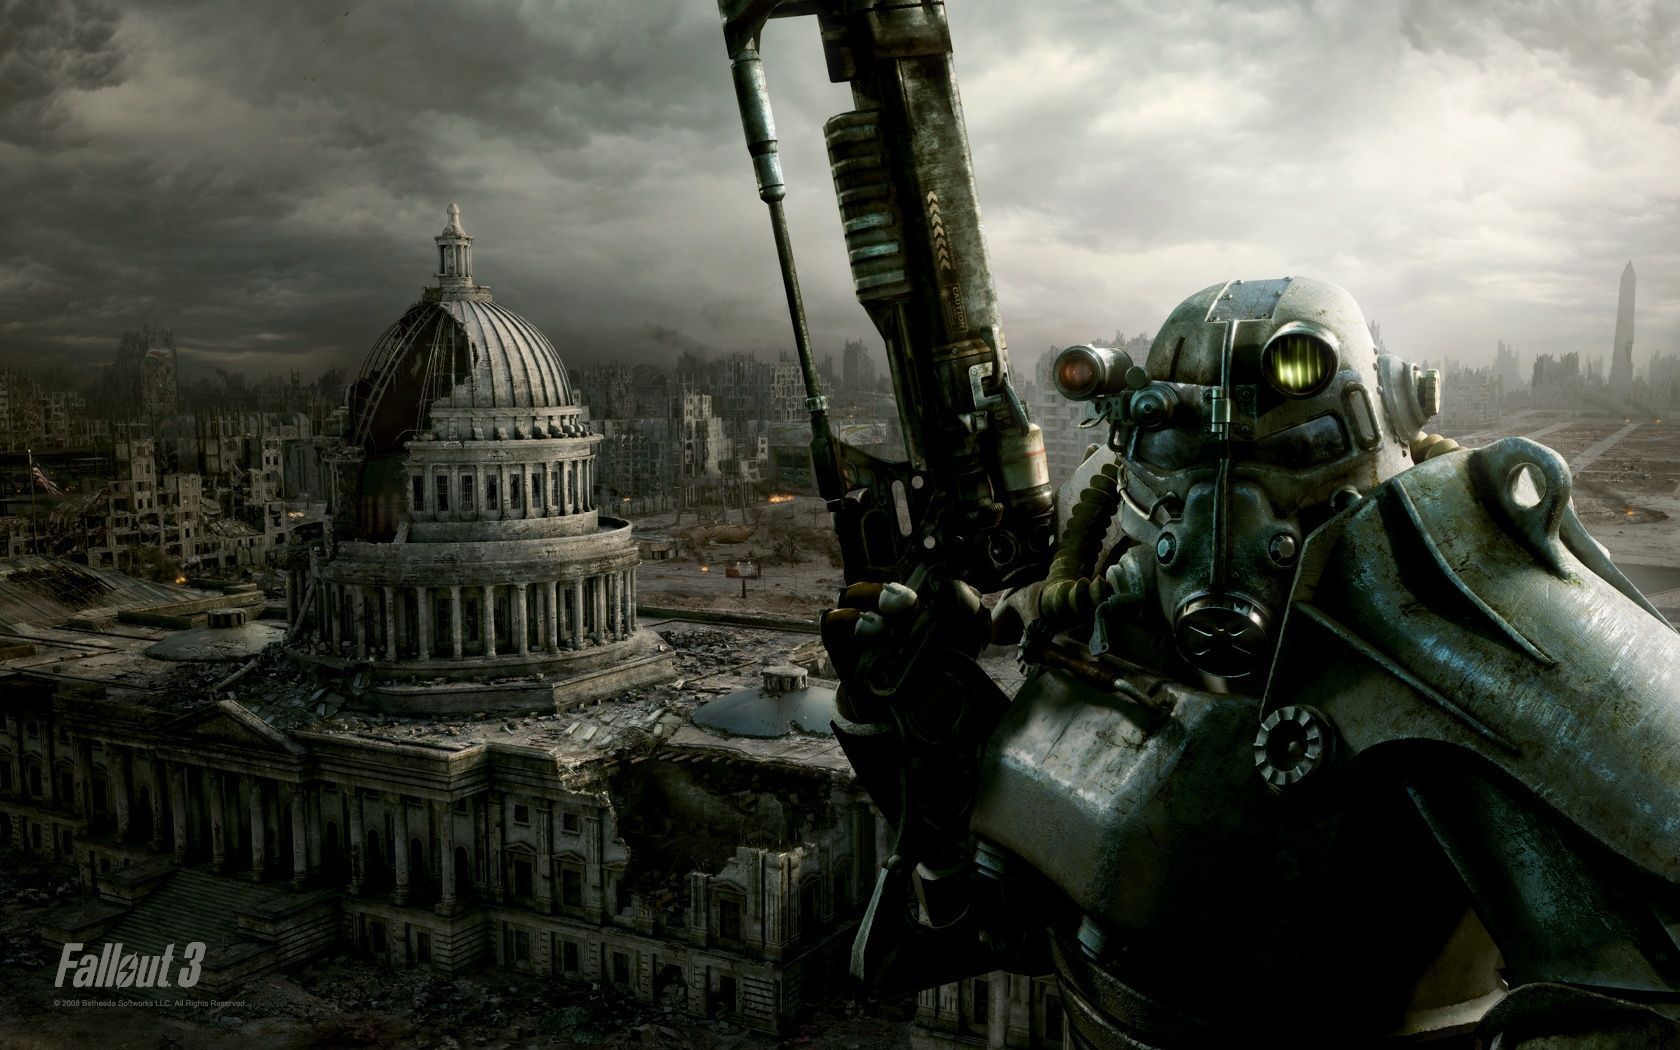 Fallout Full HD Pics Wallpapers 14937 - HD Wallpapers Site